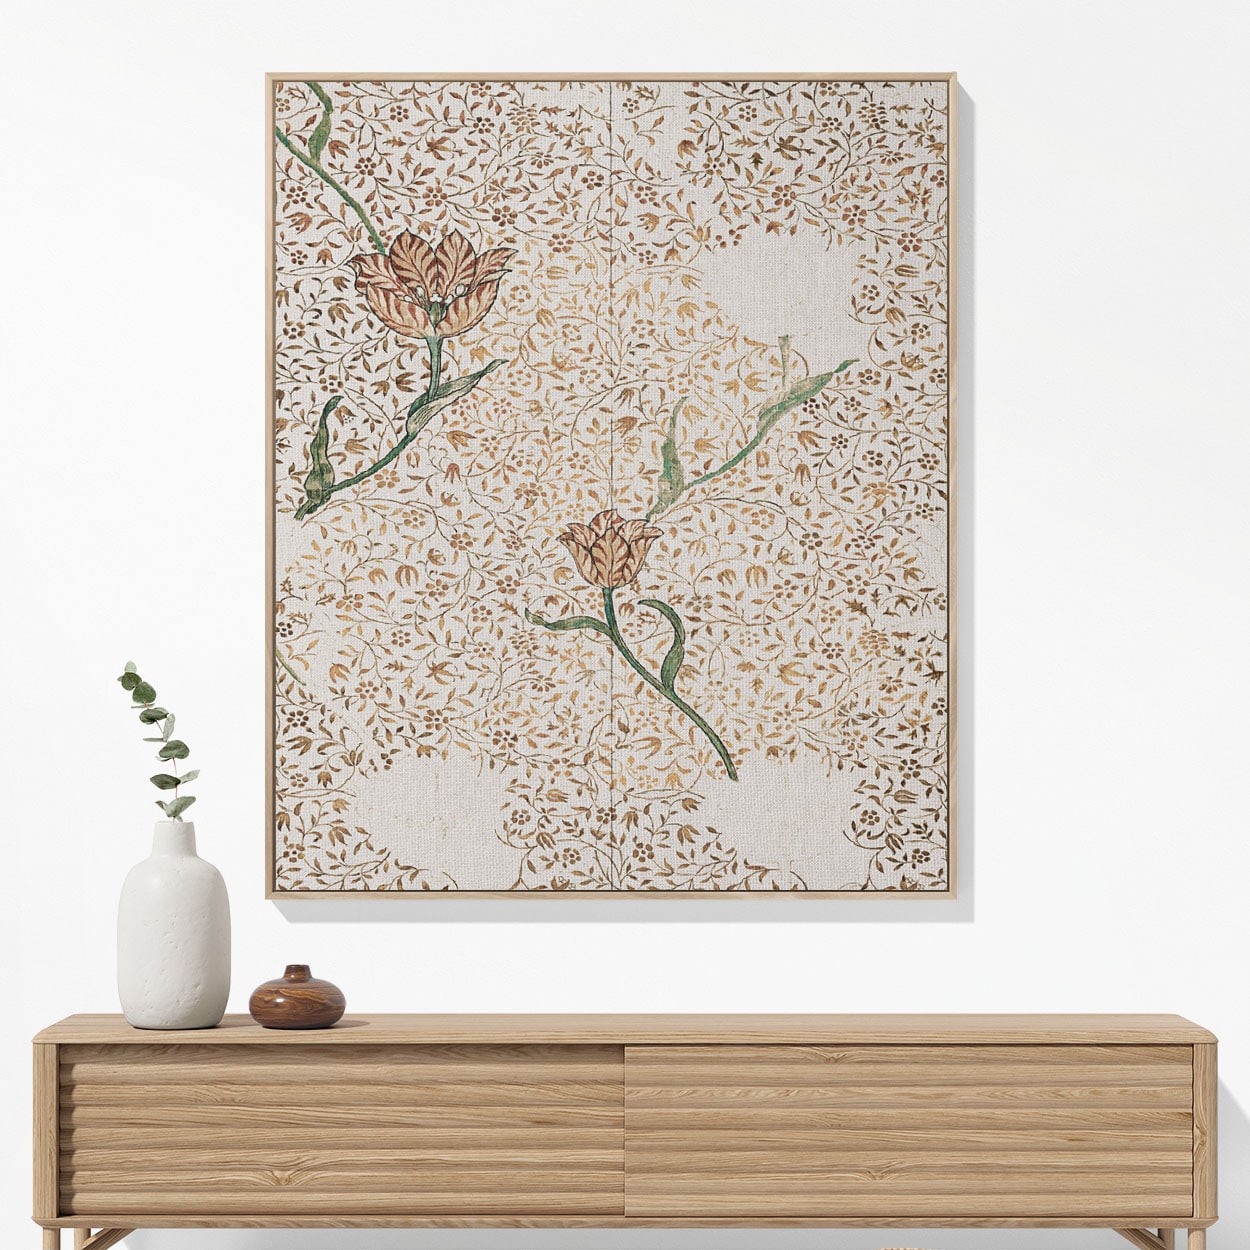 Aesthetic Floral Woven Blanket Hanging on a Wall as Framed Wall Art